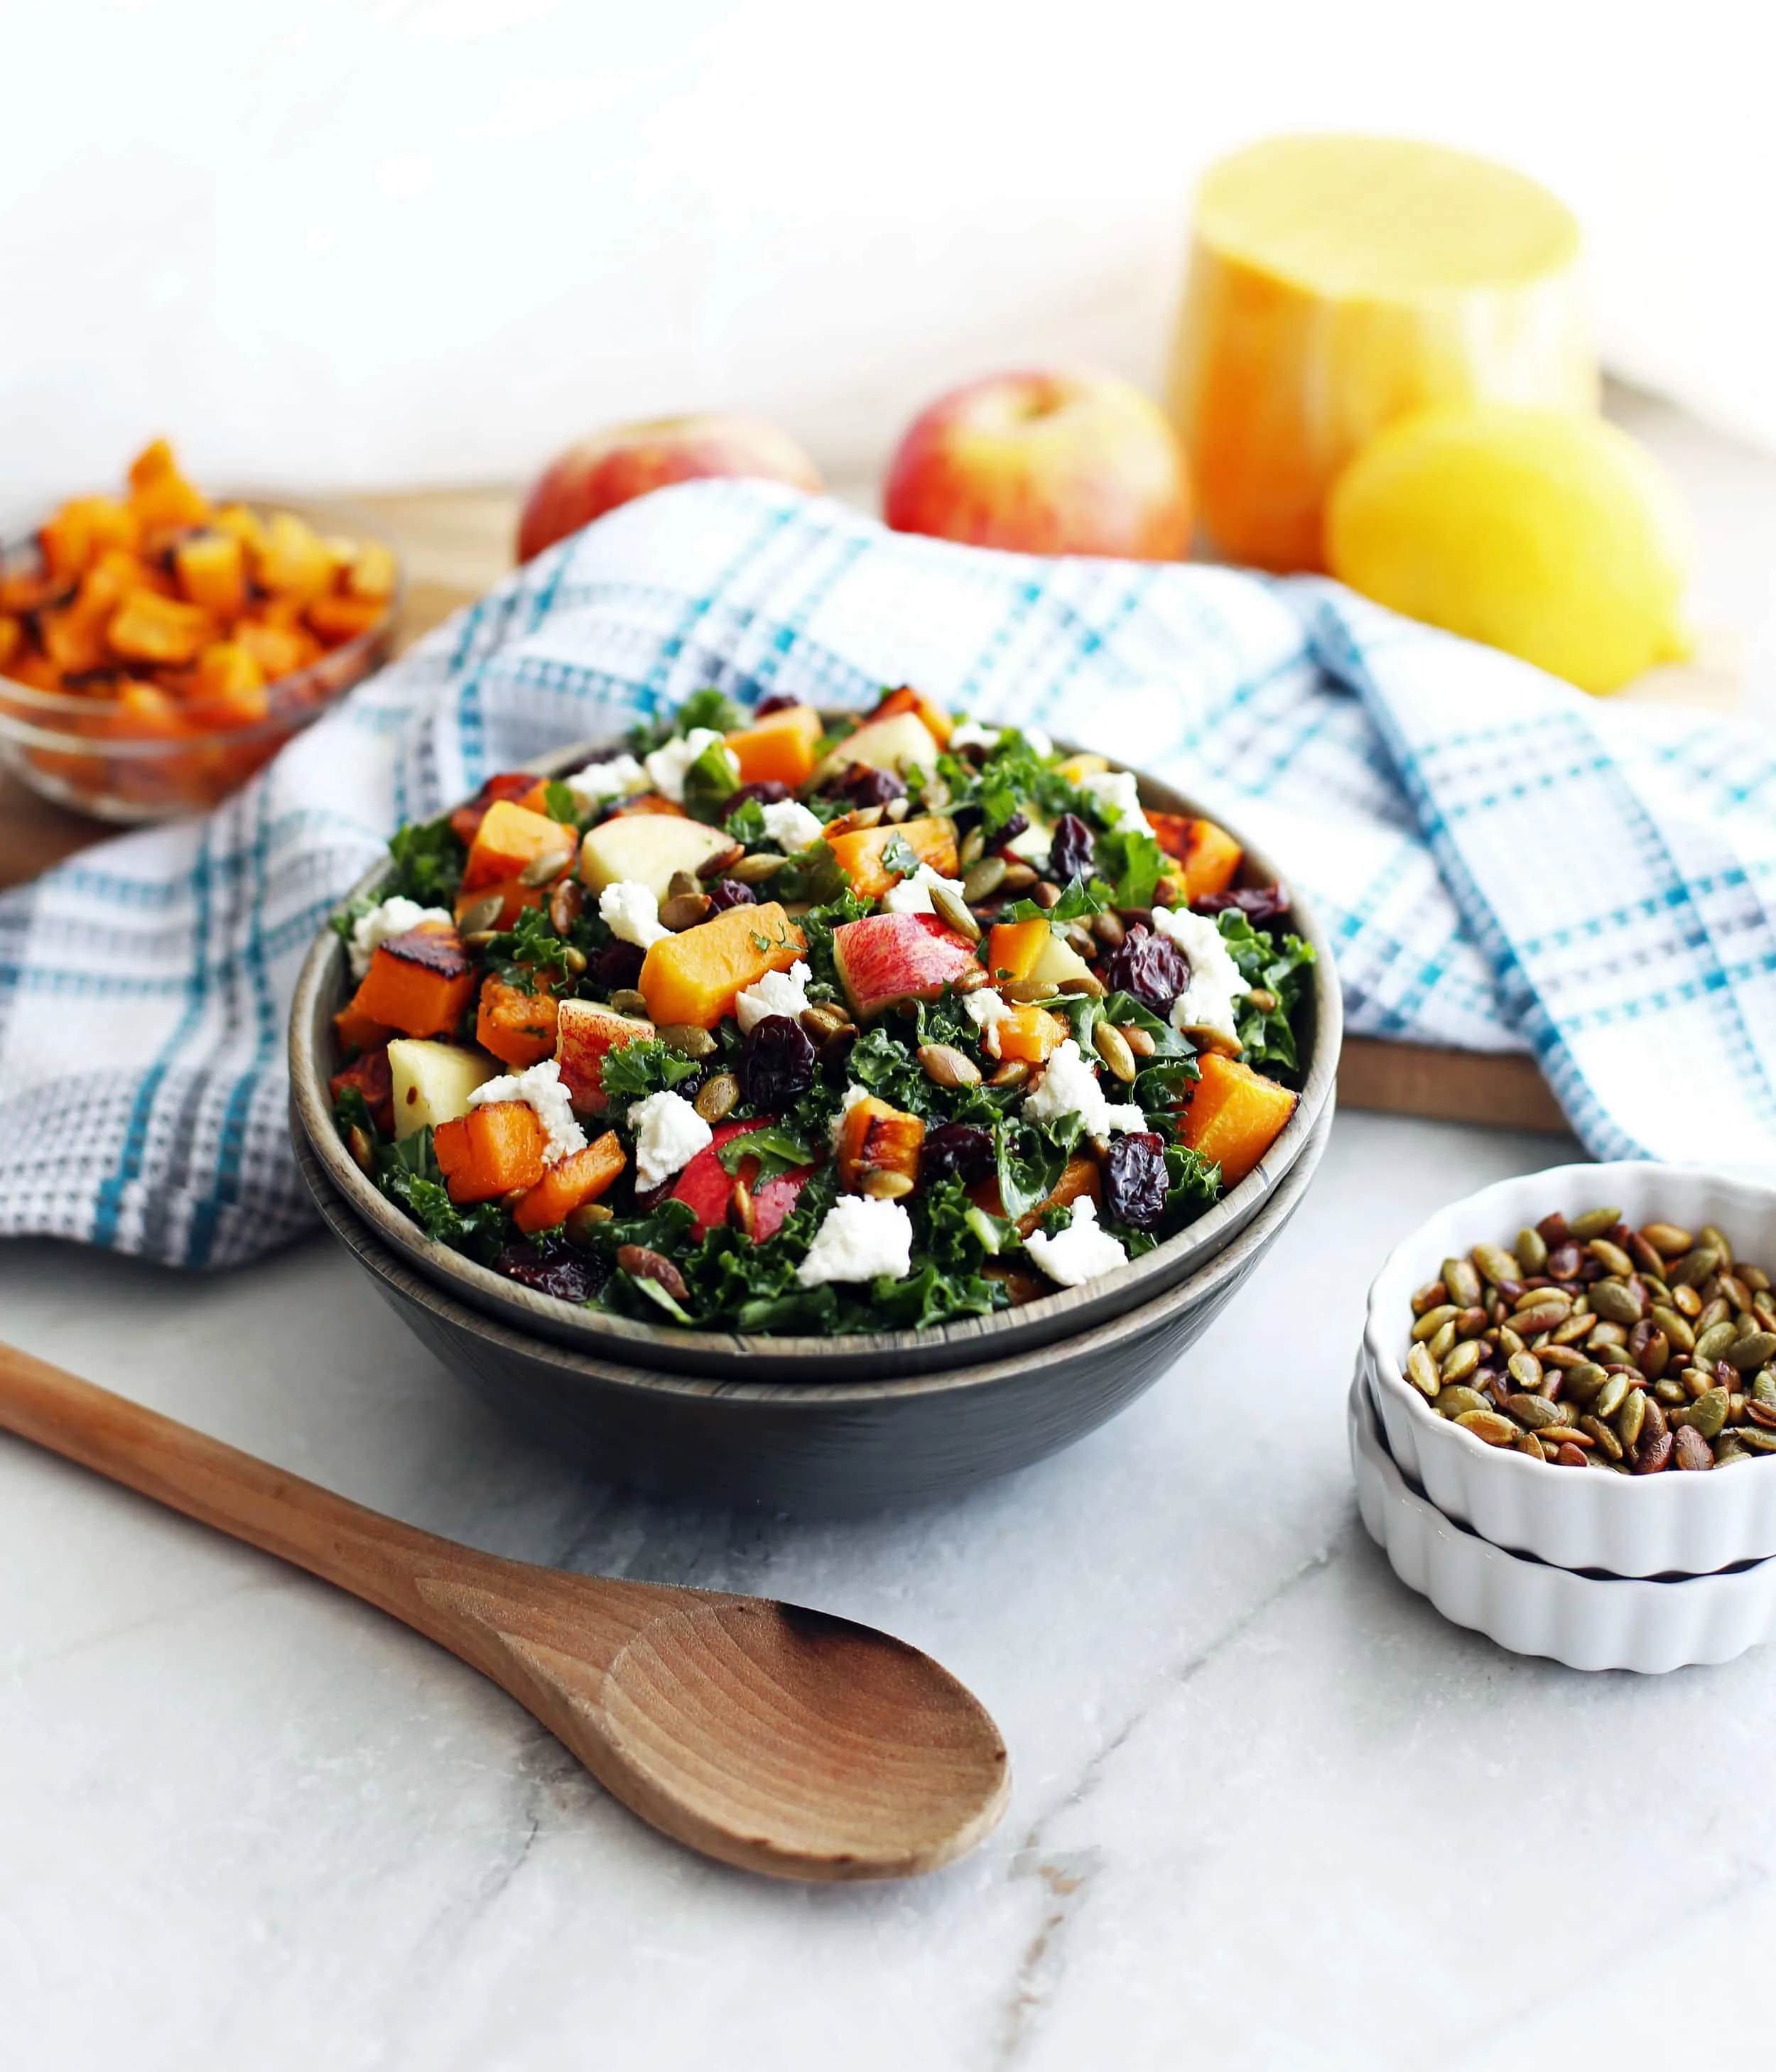 A wooden bowl filled with Roasted Butternut Squash and Apple Kale Salad with Lemon Vinaigrette